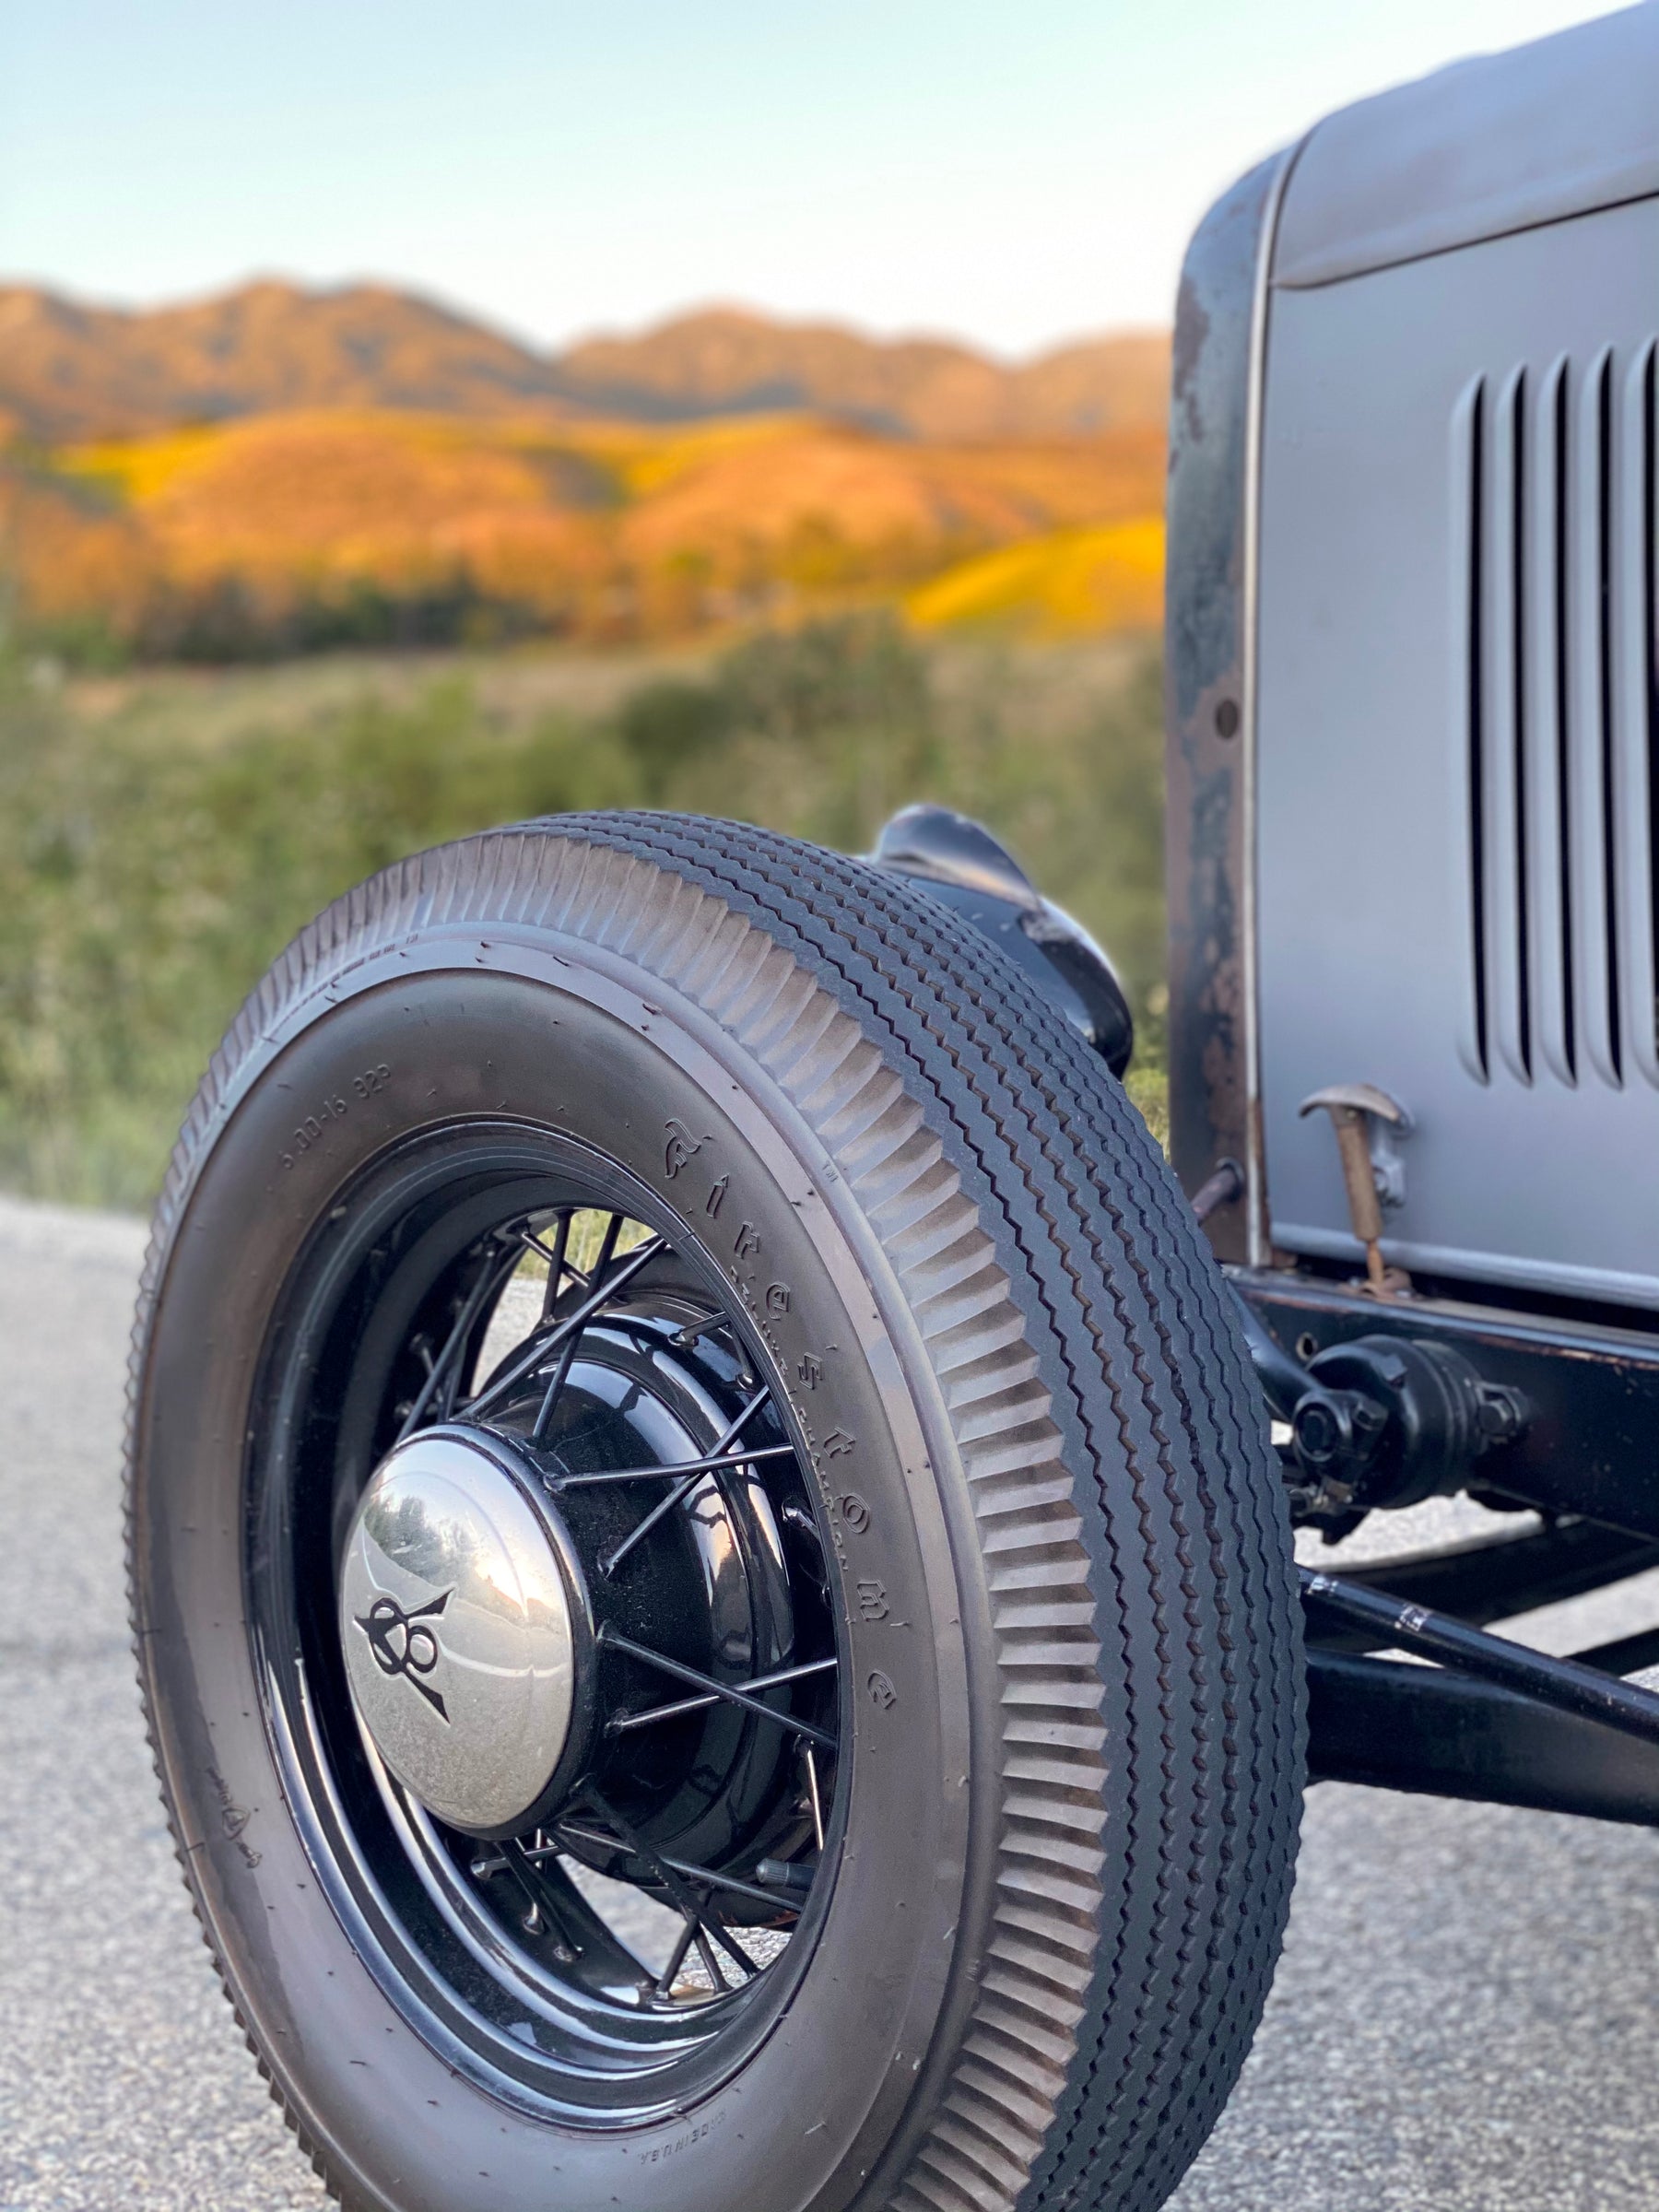 1932 Ford Roadster Front Tire Close Up FINE ART PRINT